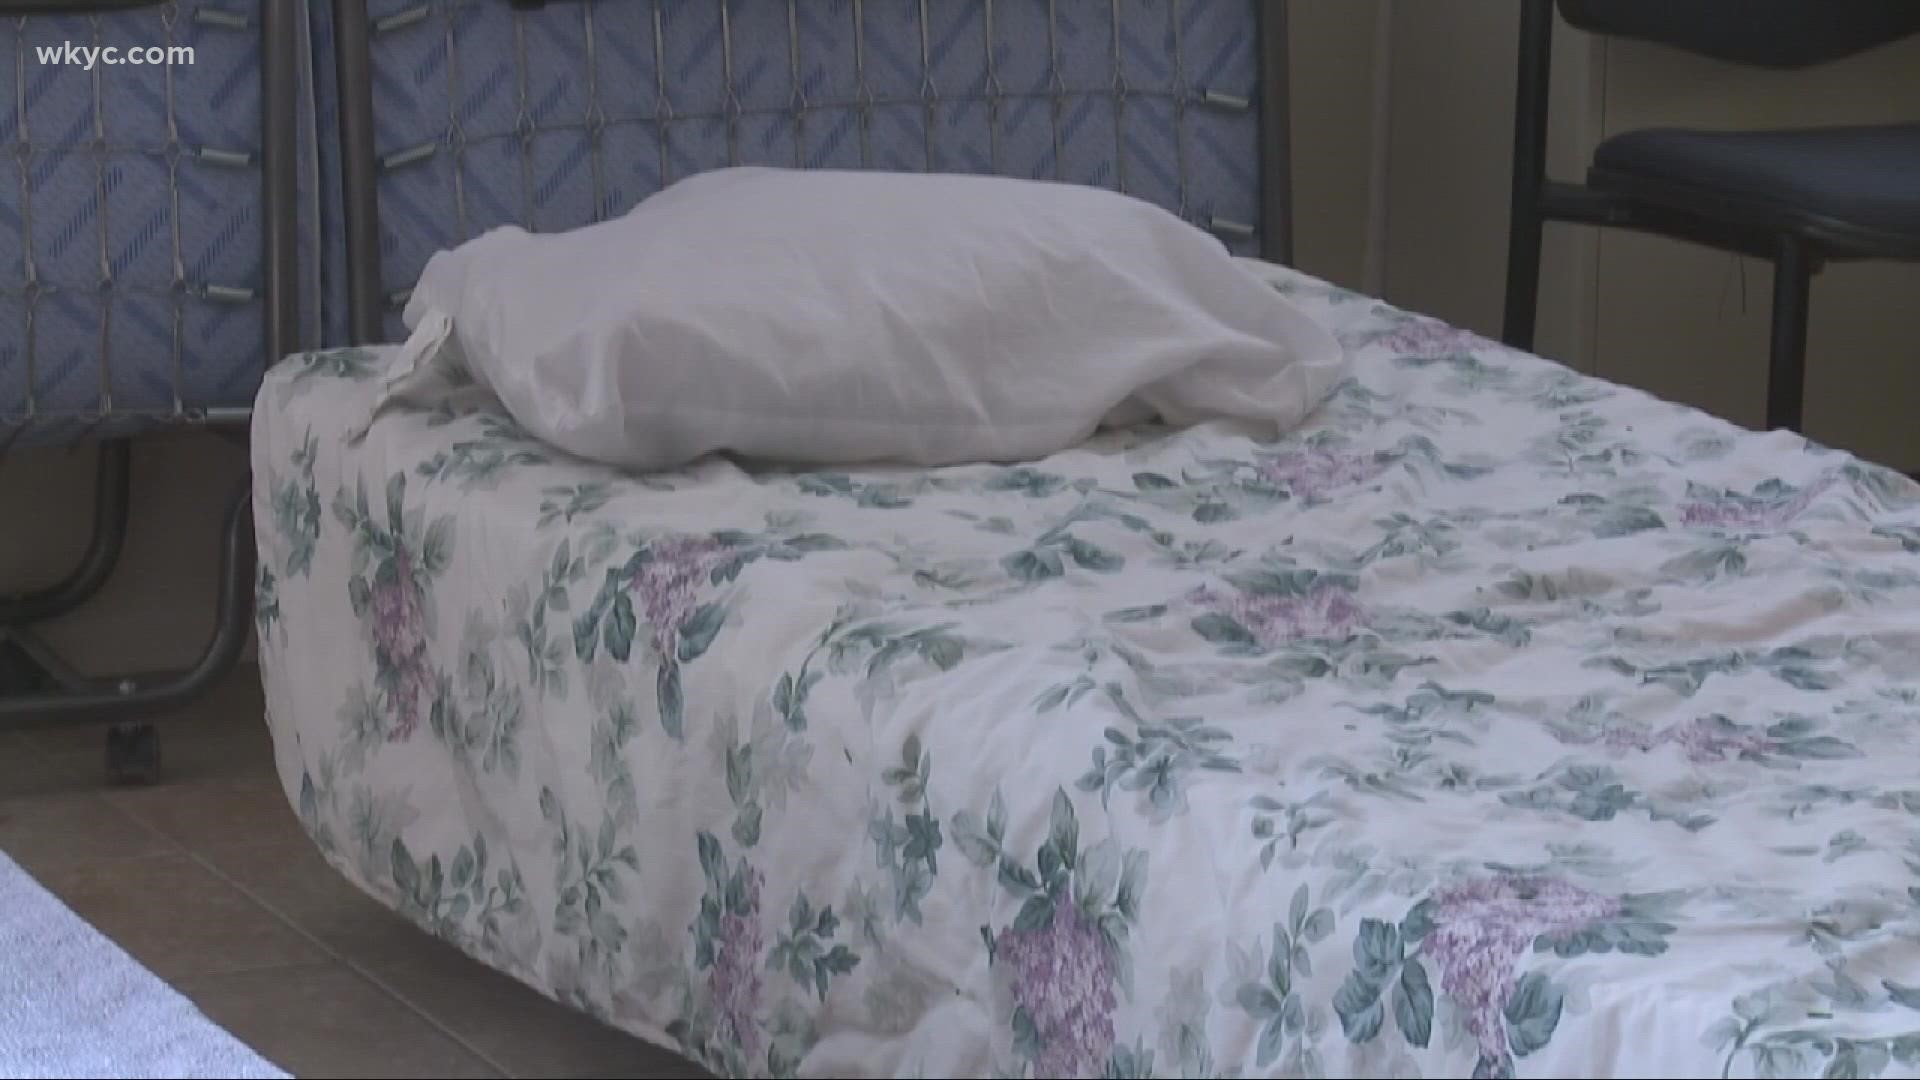 One Northeast Ohio program is partnering with local hotels to help get individuals experiencing homelessness back on their feet.